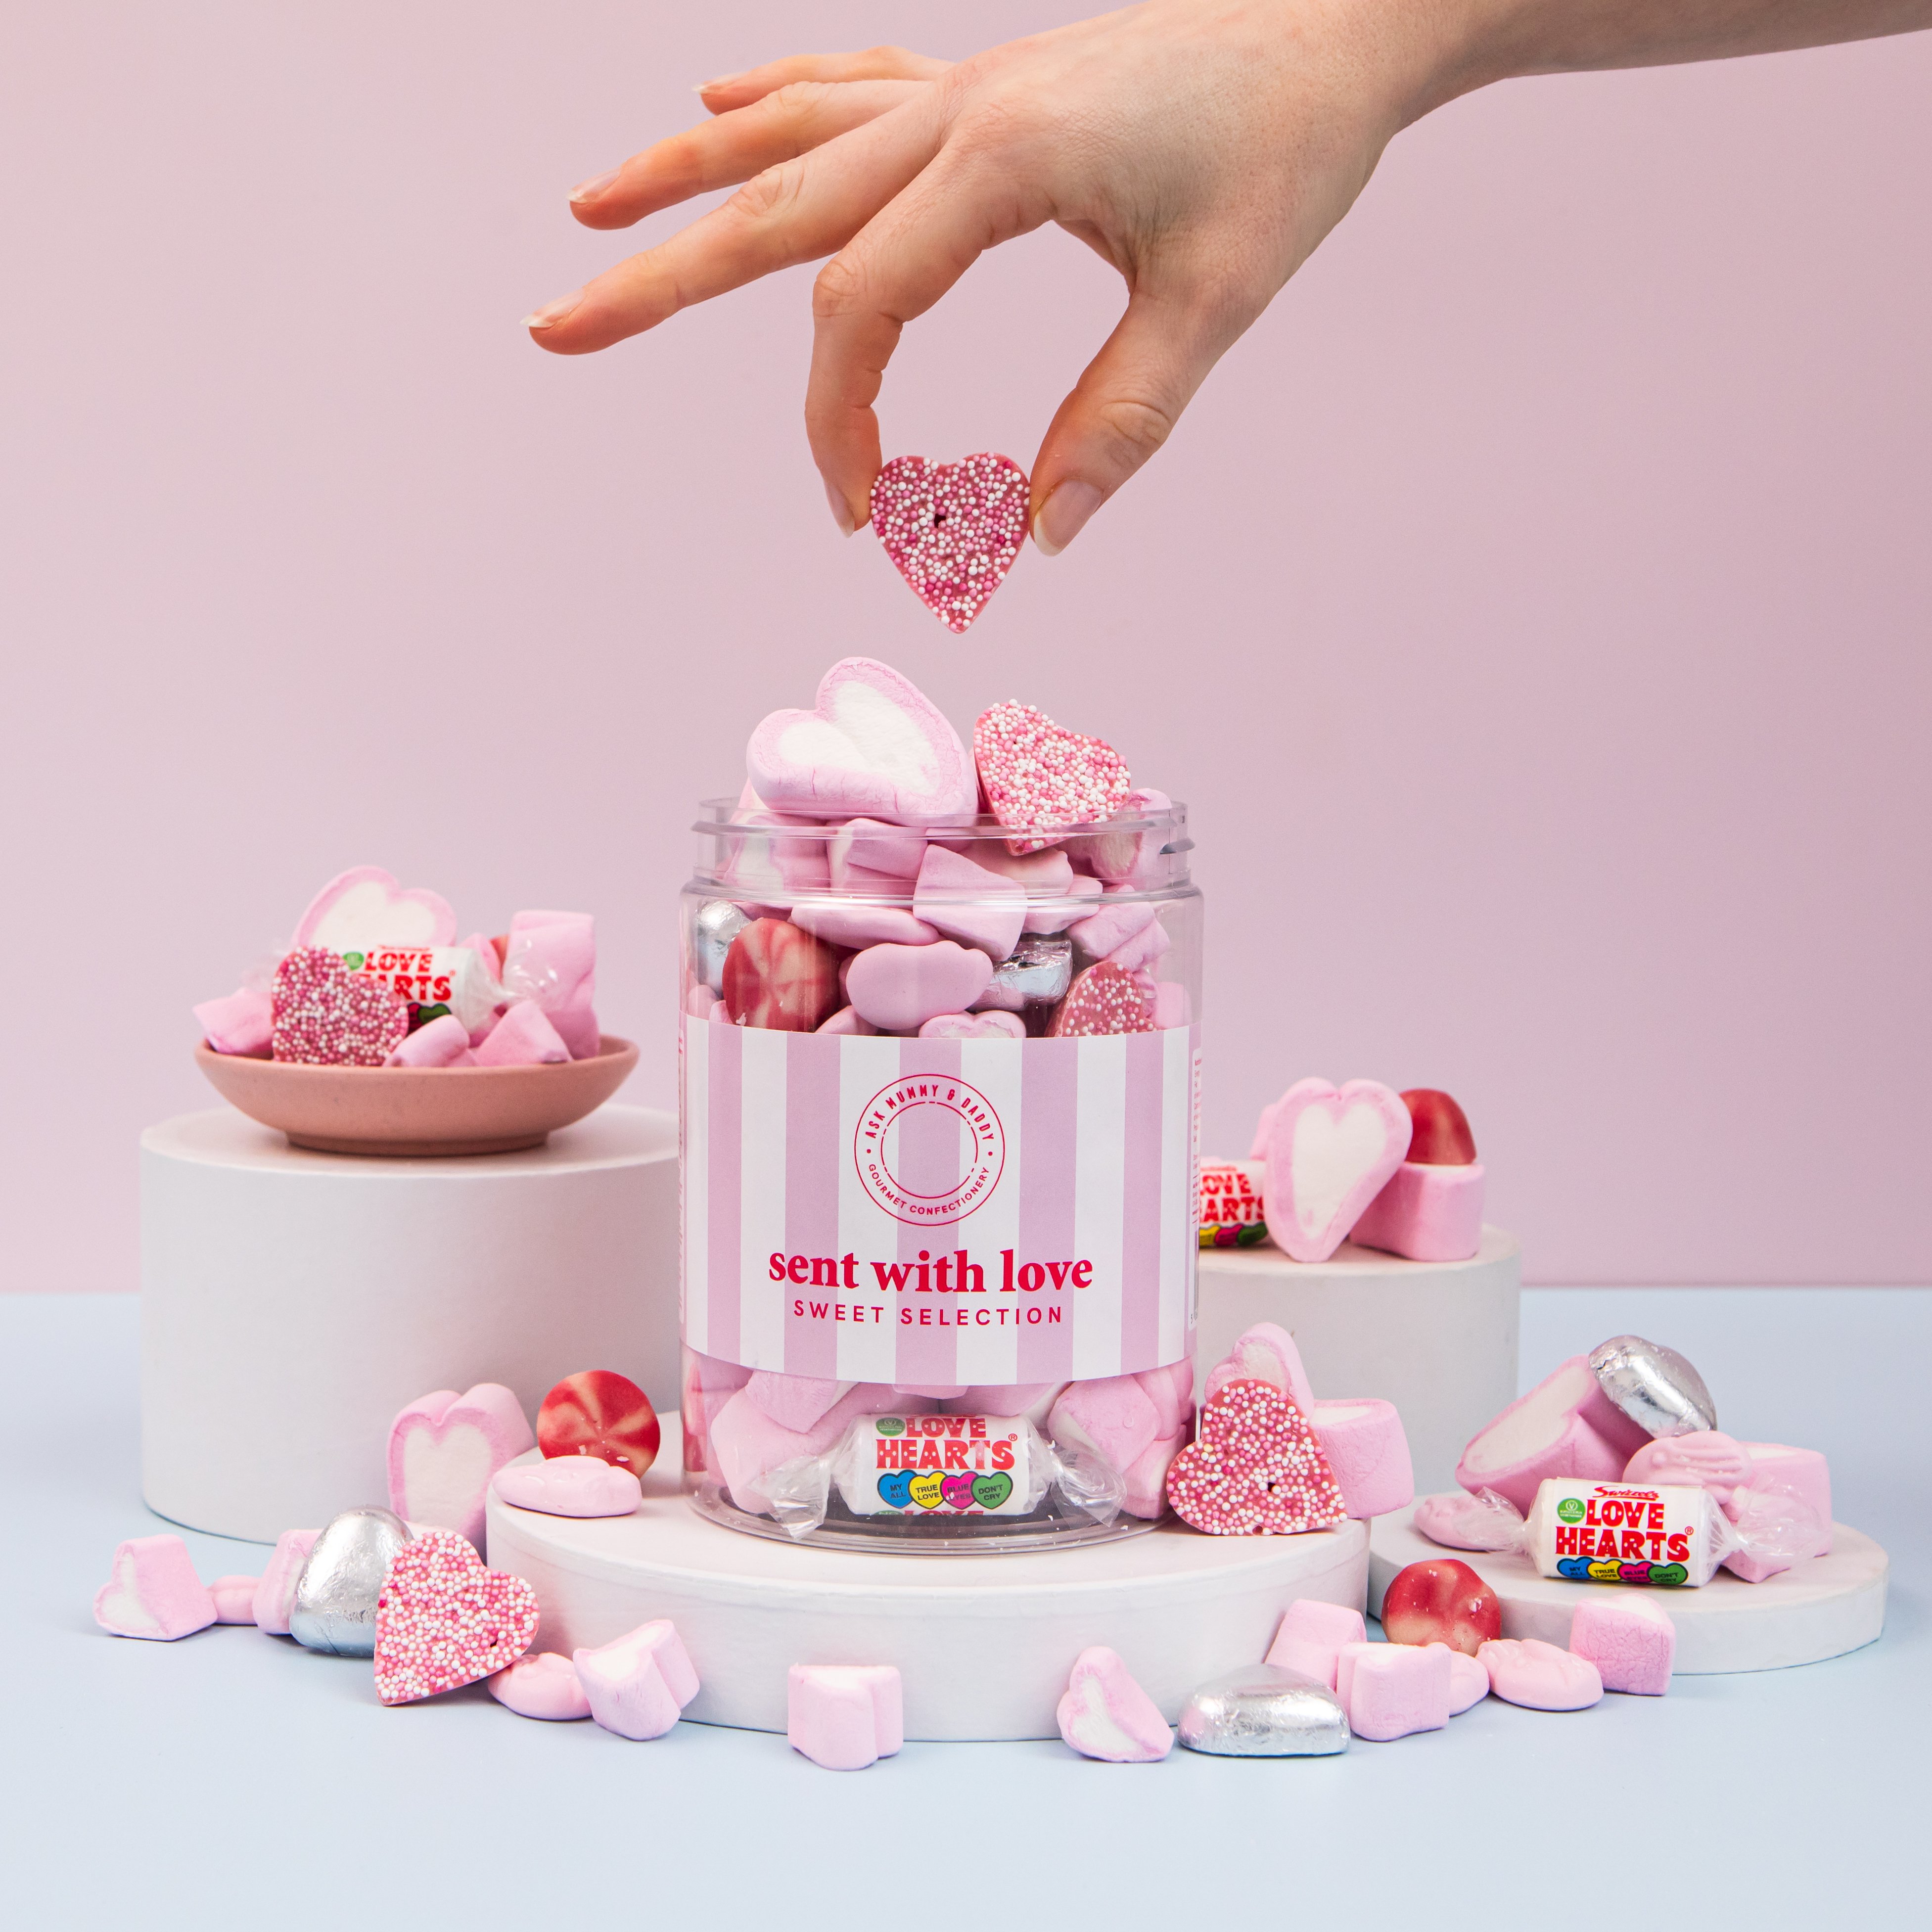 Swizzels Love Hearts Sent With Love Sweet Jar 600G Sweets